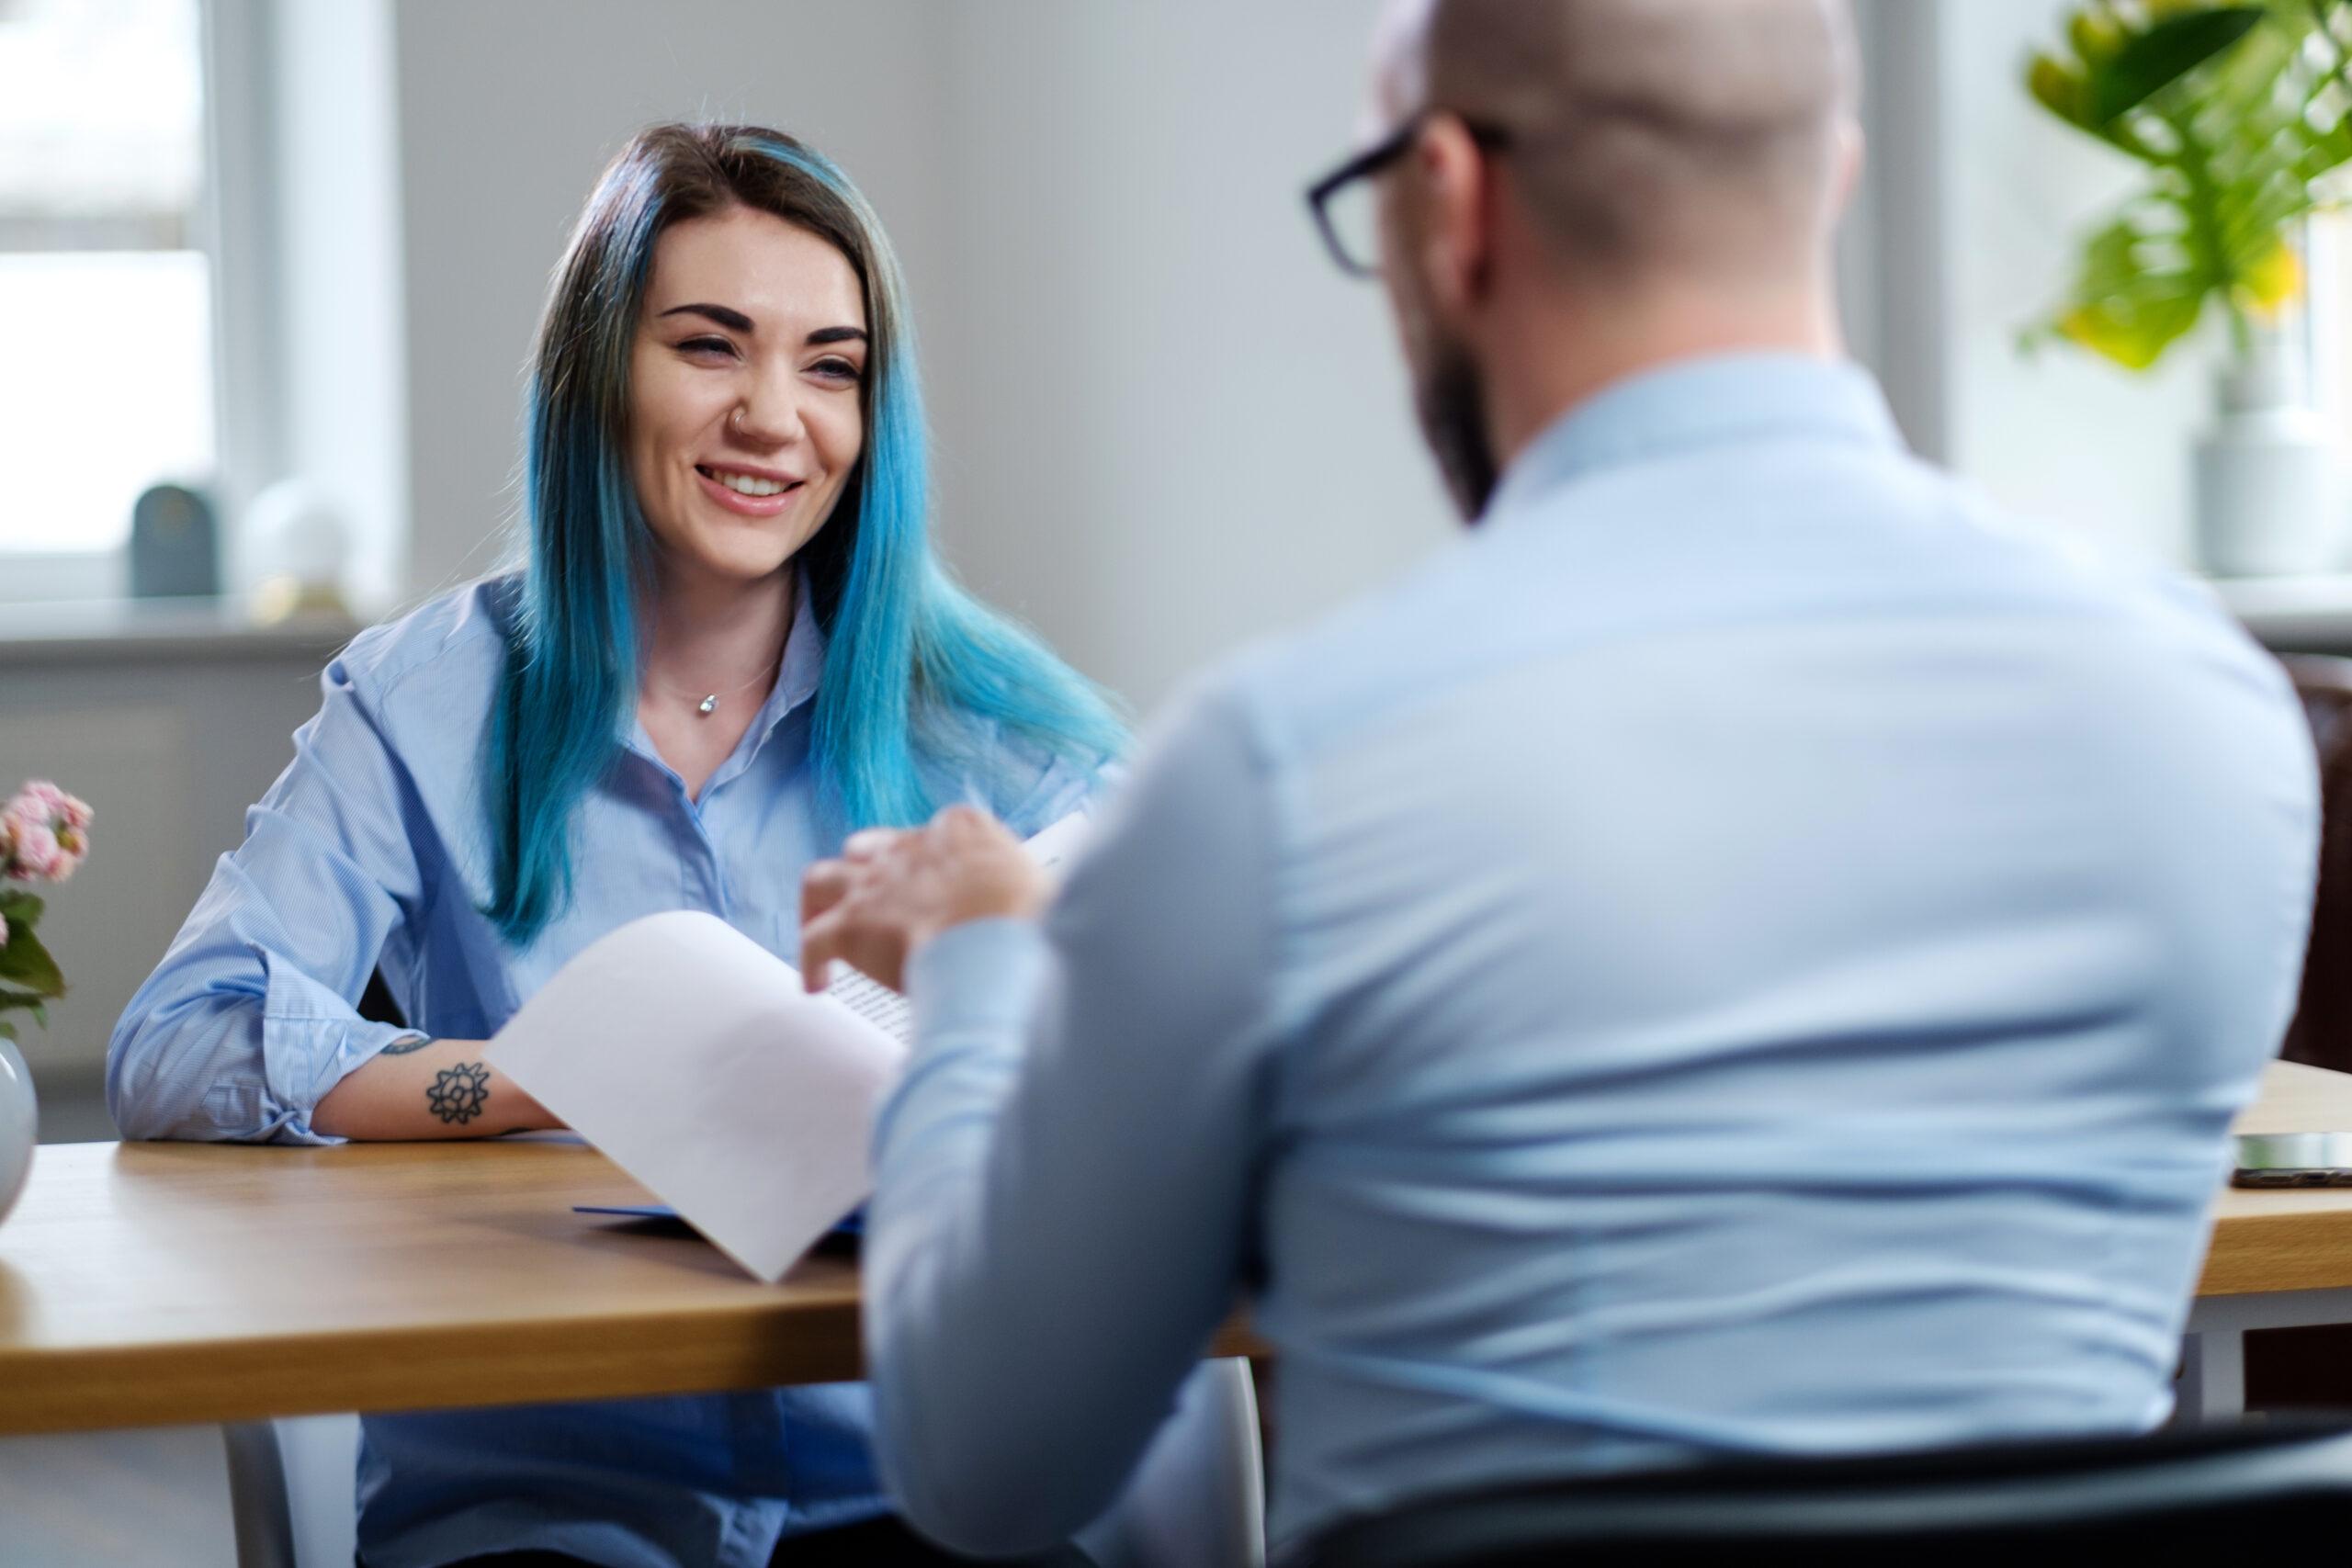 An image of a young woman being interviewed for a job in an office setting.